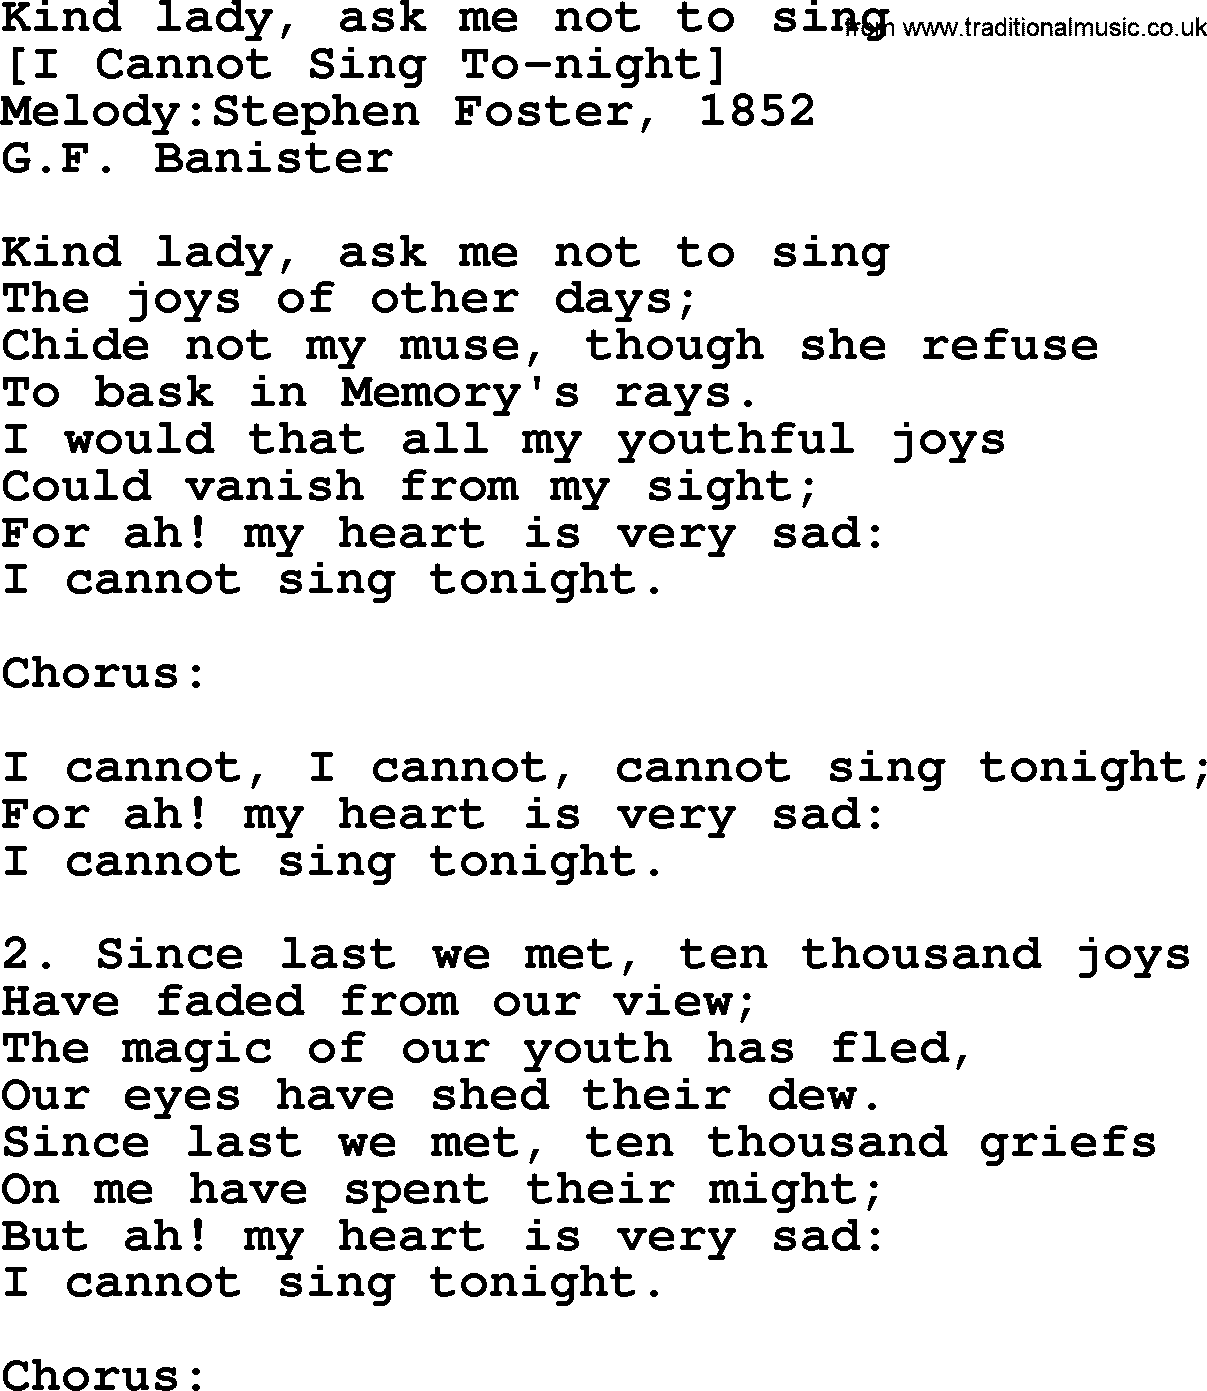 Old American Song: Kind Lady, Ask Me Not To Sing, lyrics